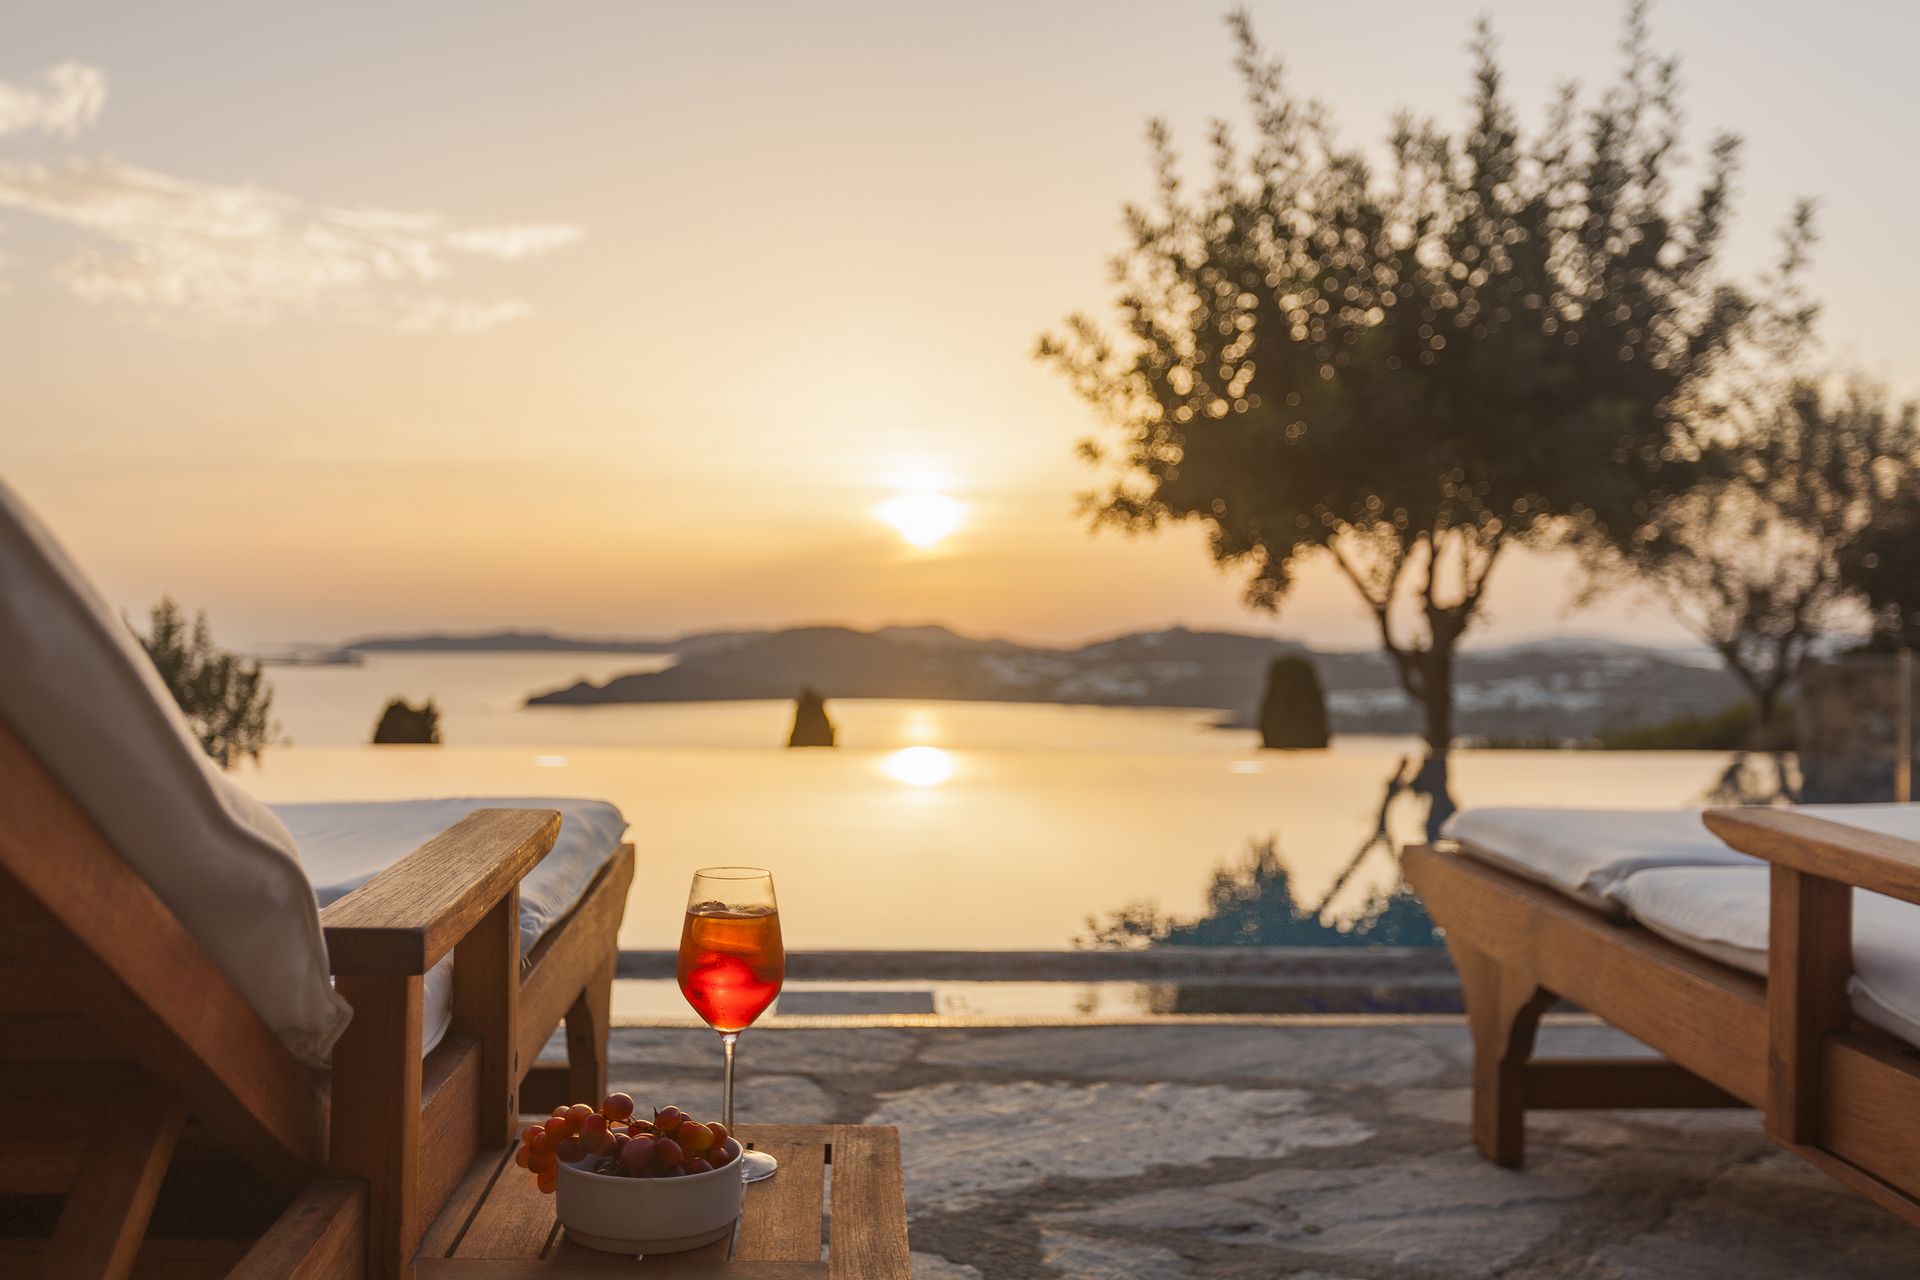 Sunset view on the poolside sunloungers at AGL Luxury Villas is one of the dauly things to do on your Mykonos honeymoon.